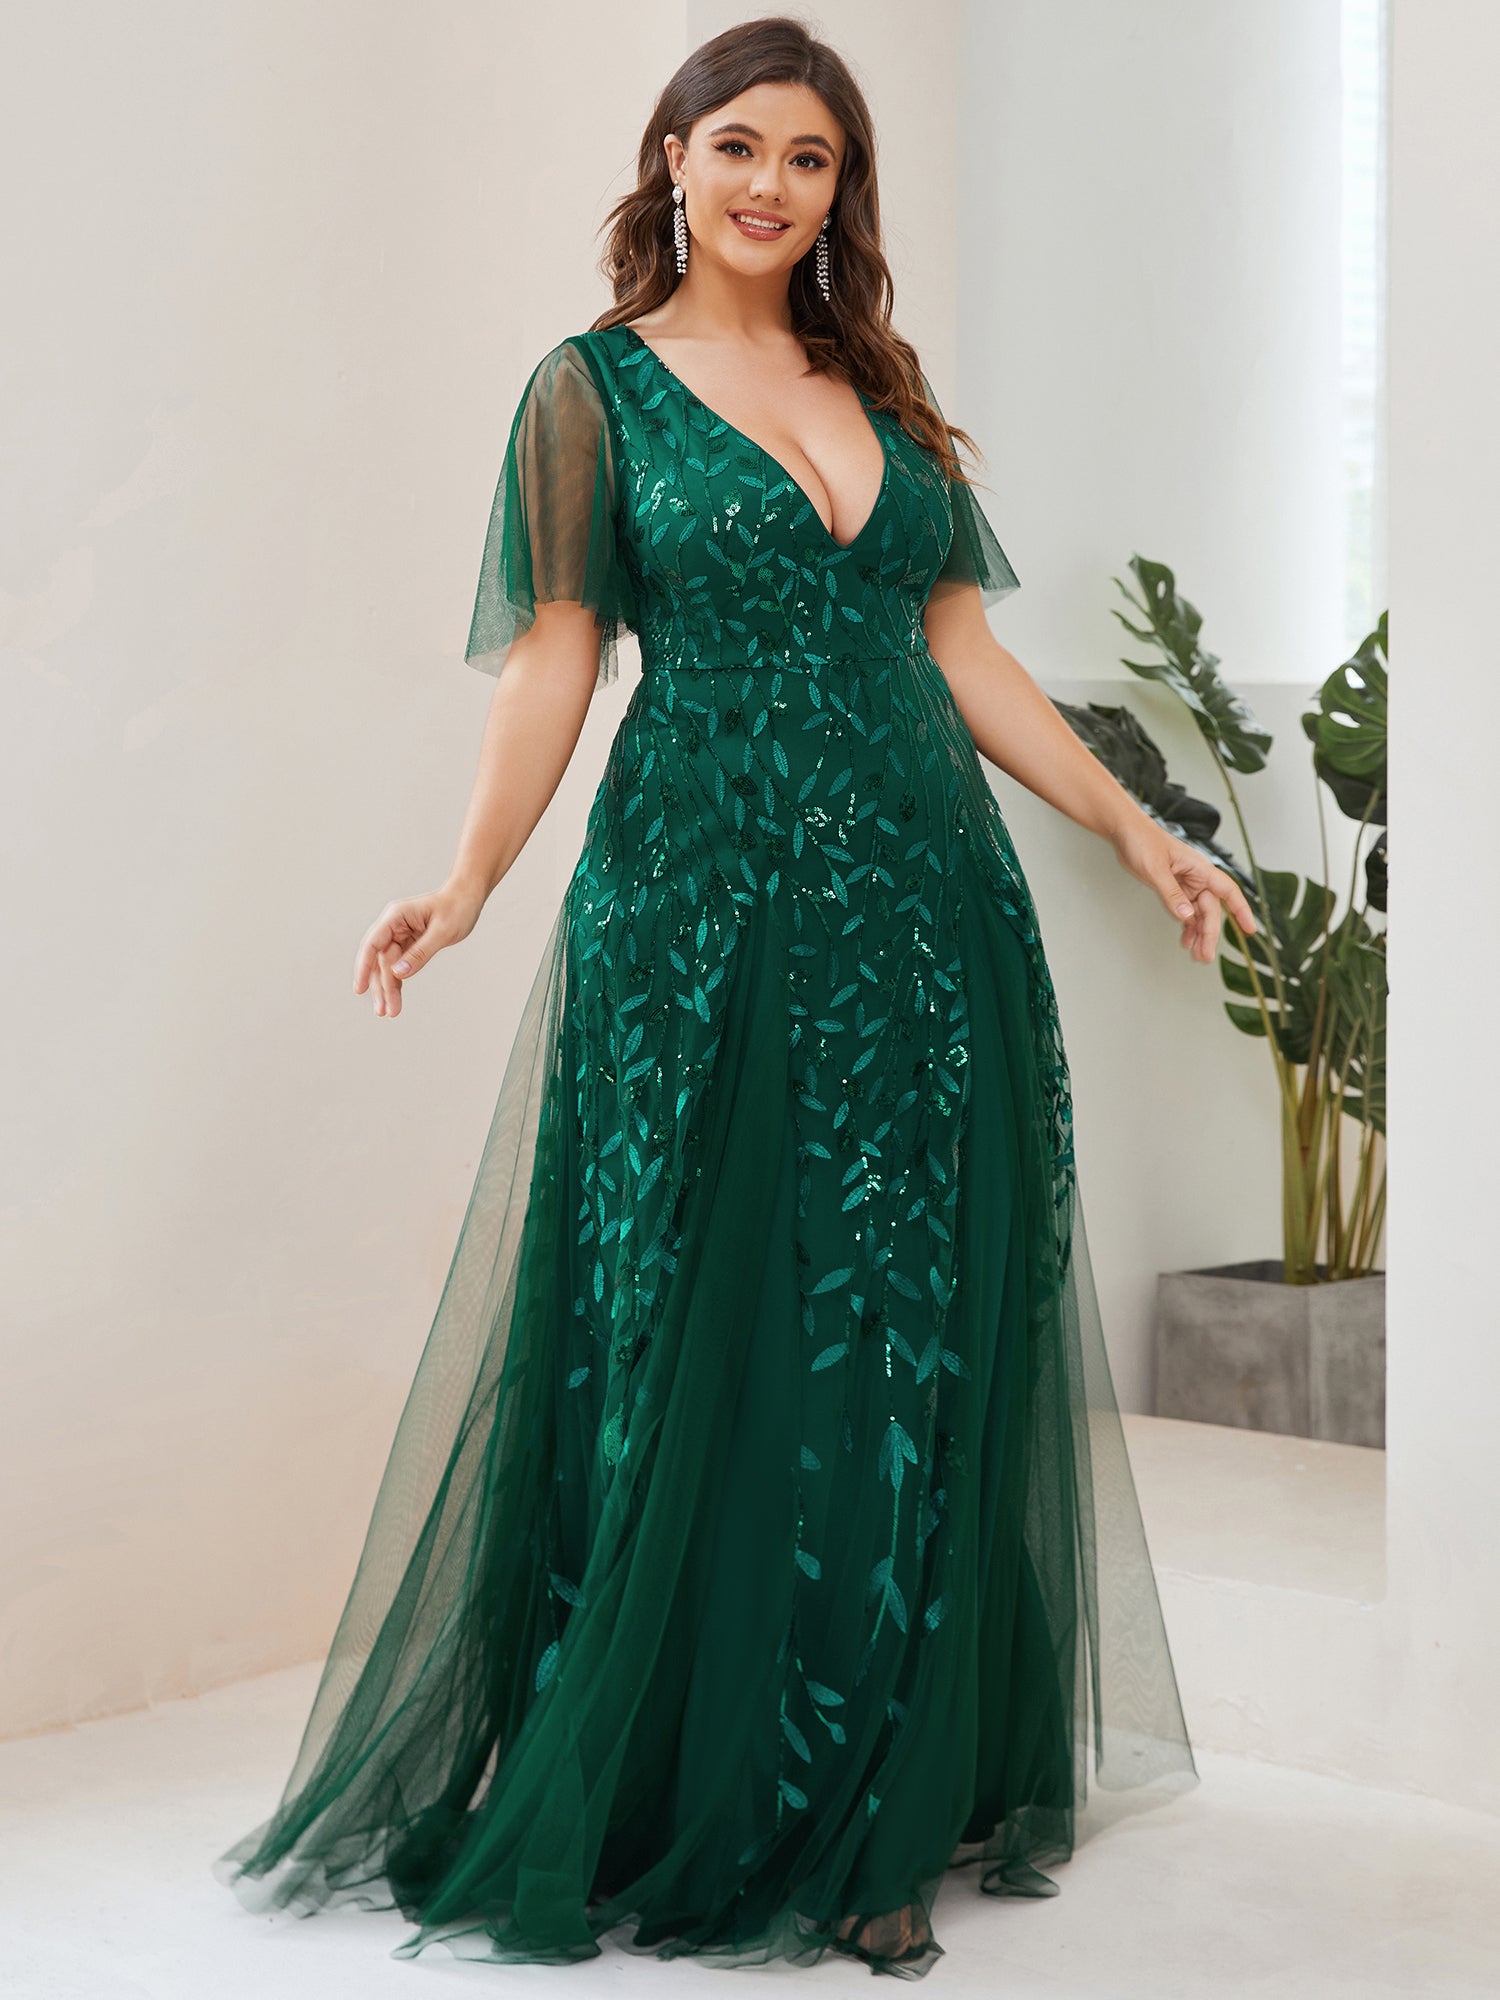 What Evening Dresses Look Best for Women on Ever Pretty?